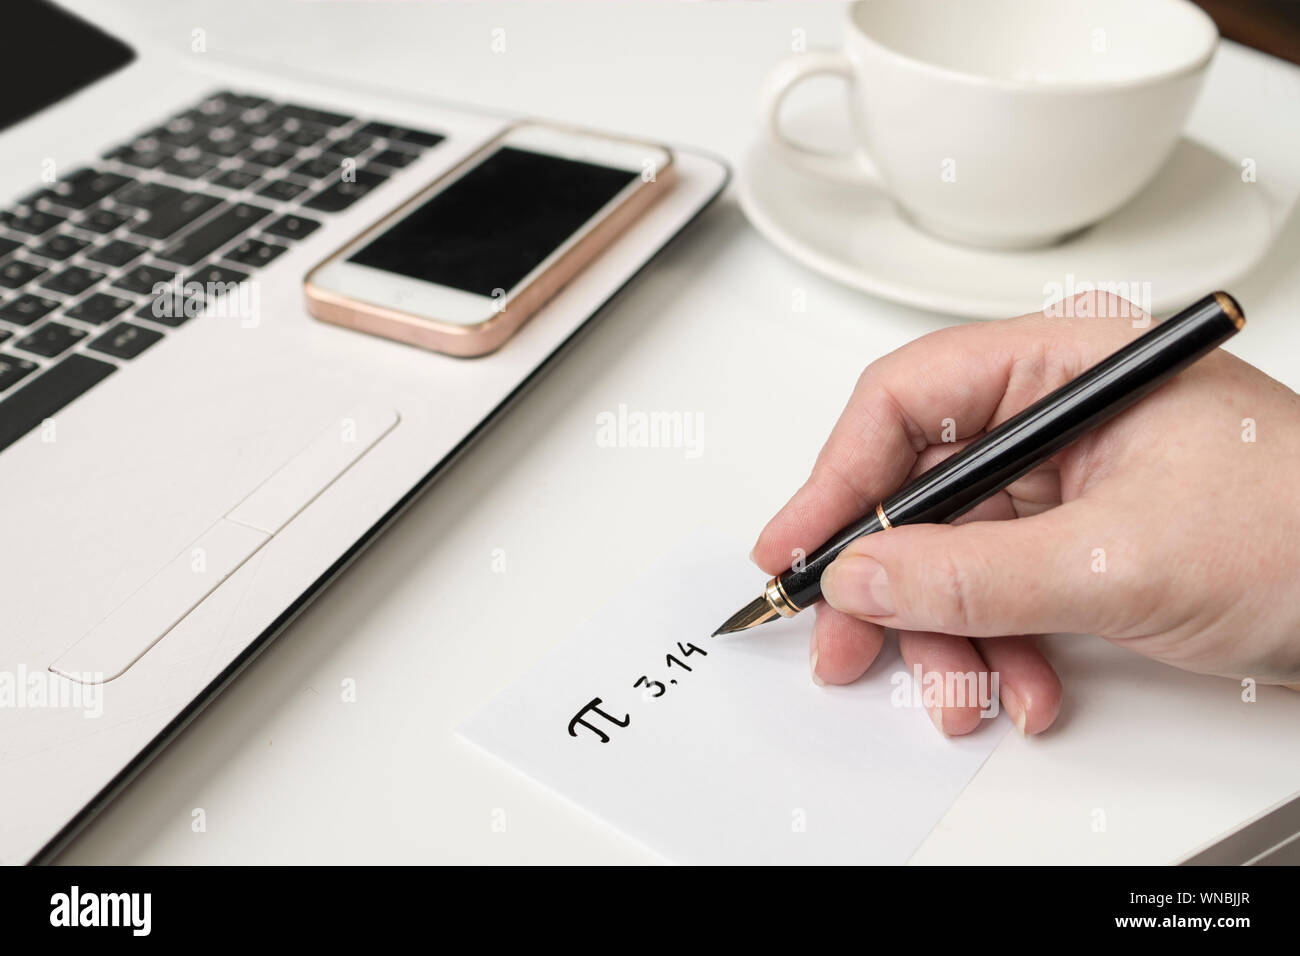 Close-up Of Hand Writing At Desk Stock Photo